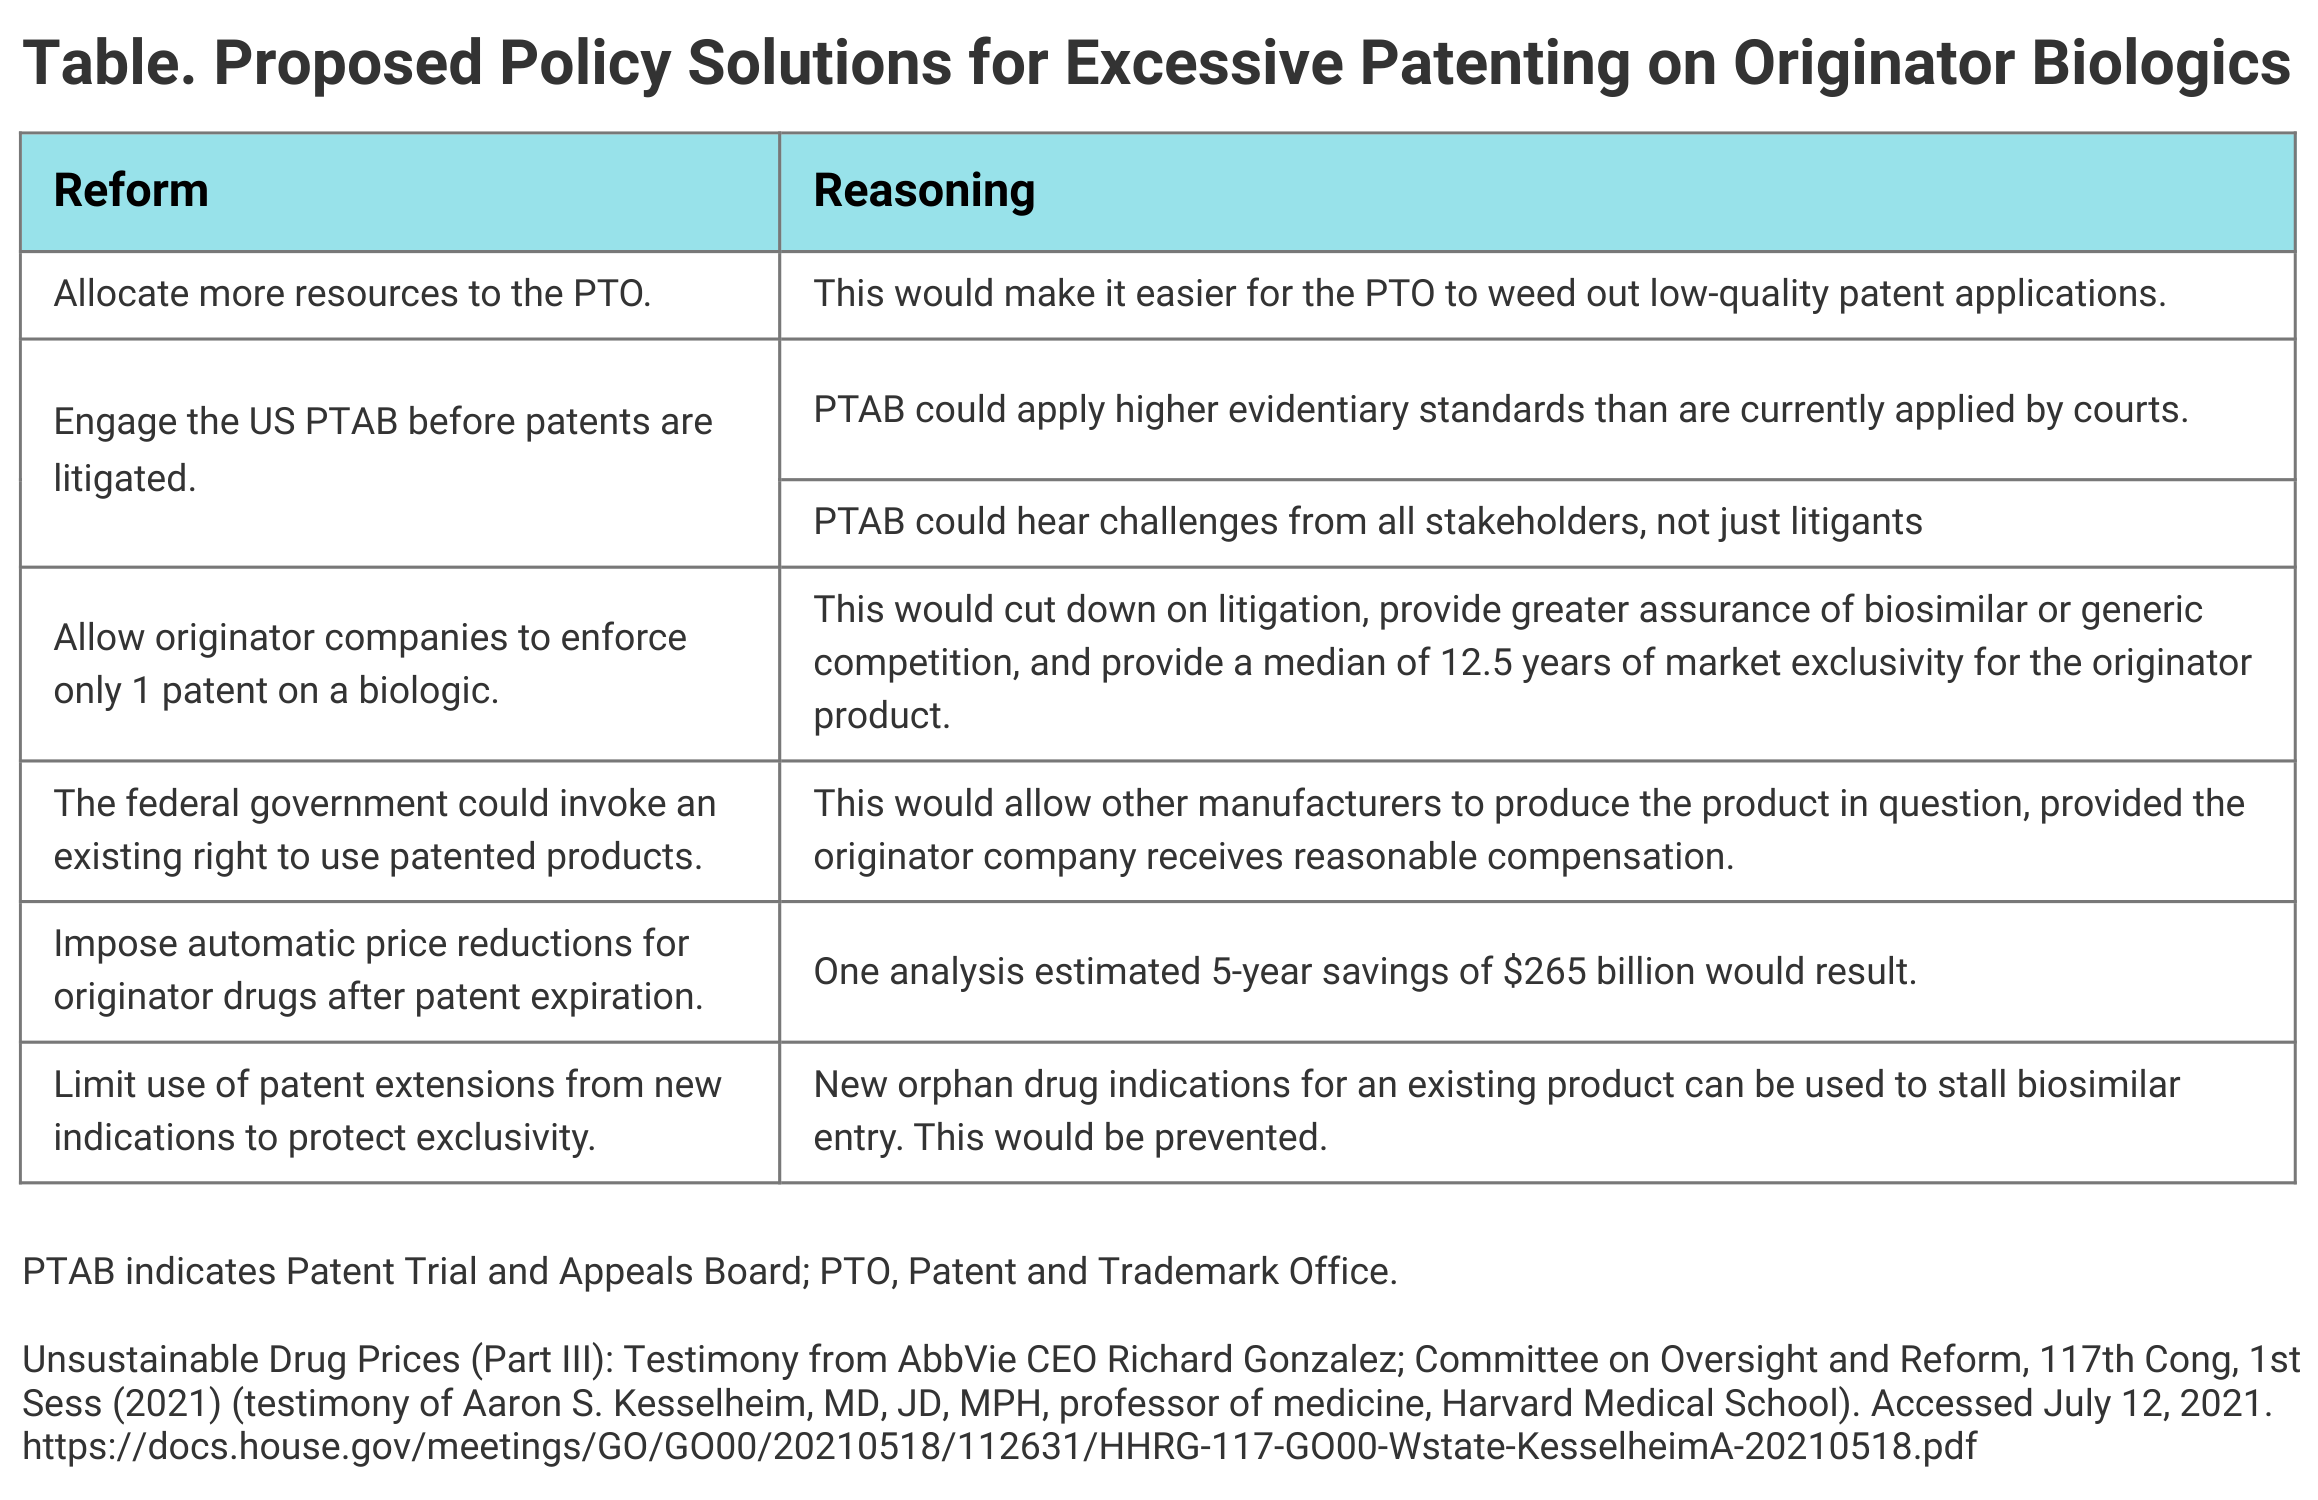 Table. Proposed Policy Solutions for Excessive Patenting on Originator Biologics